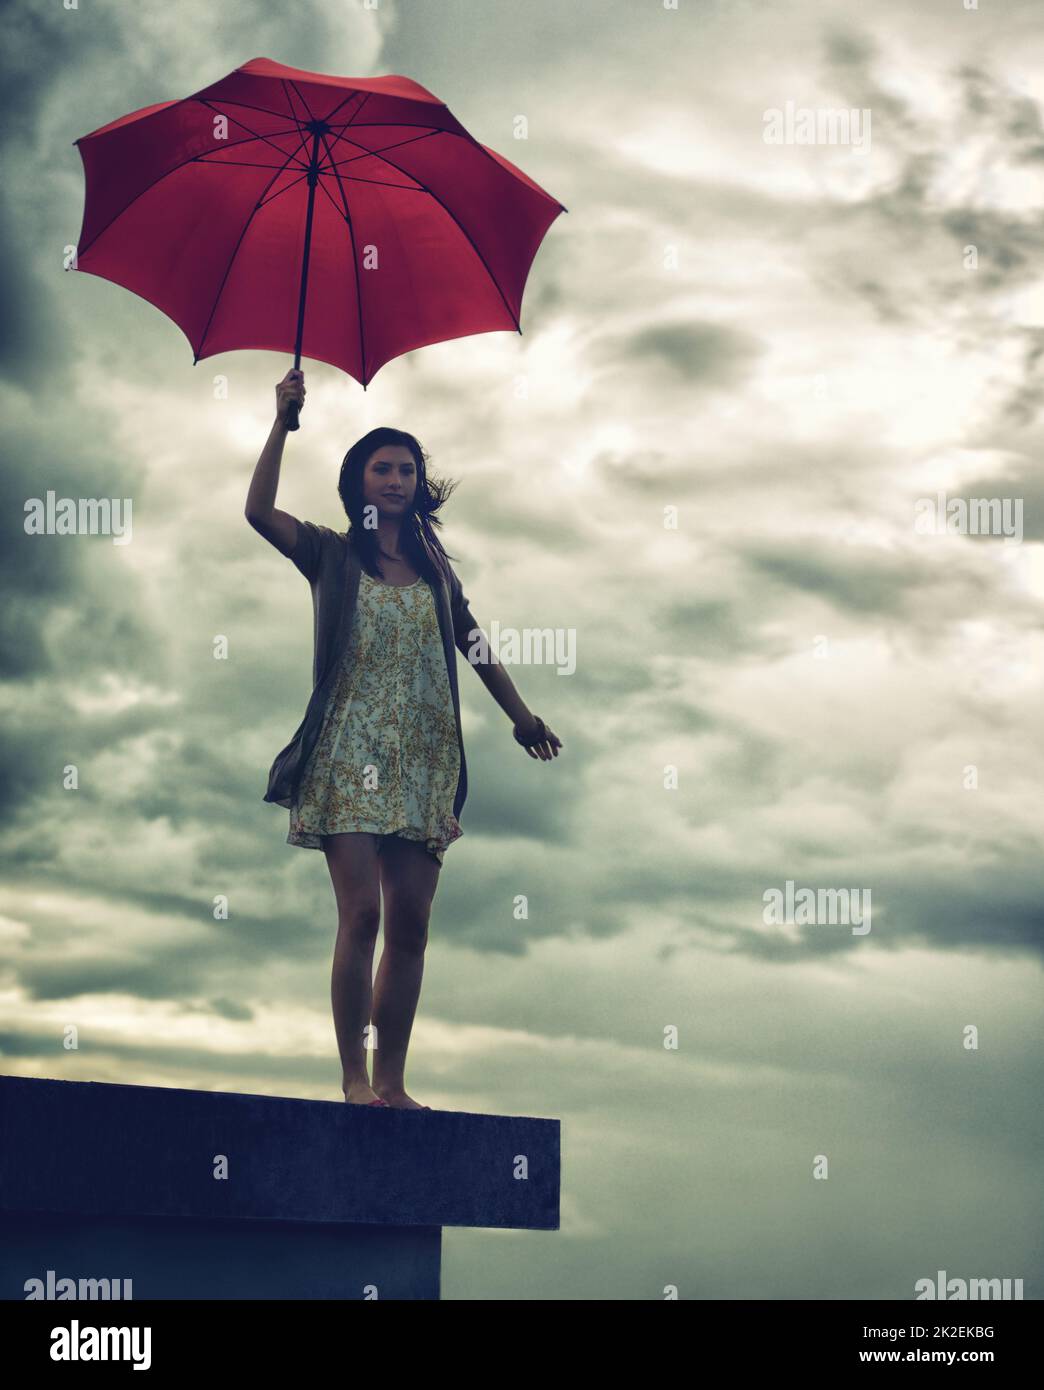 Ready to face lifes storms. Cute young woman holding an umbrella while standing on a rooftop. Stock Photo